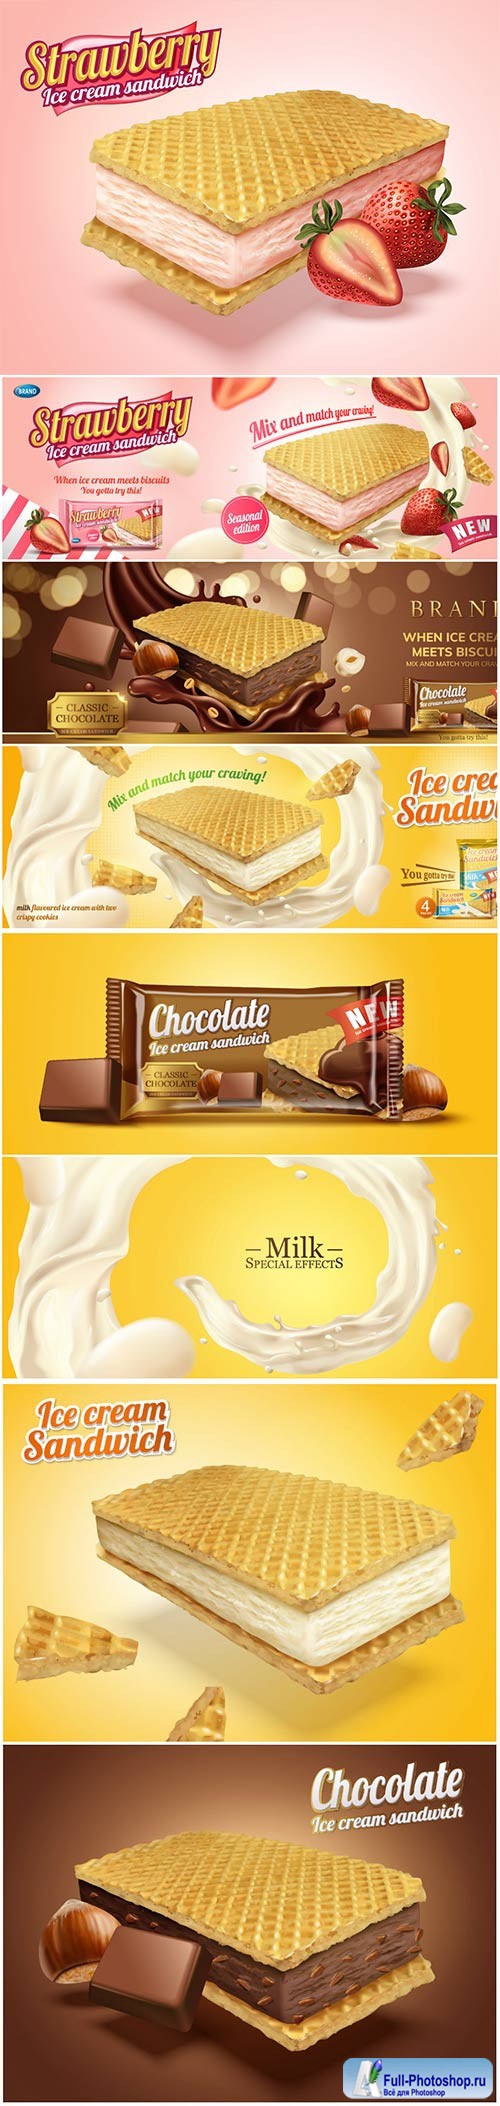 Milk flavoured ice cream sandwich with wafer cookies in 3d illustration